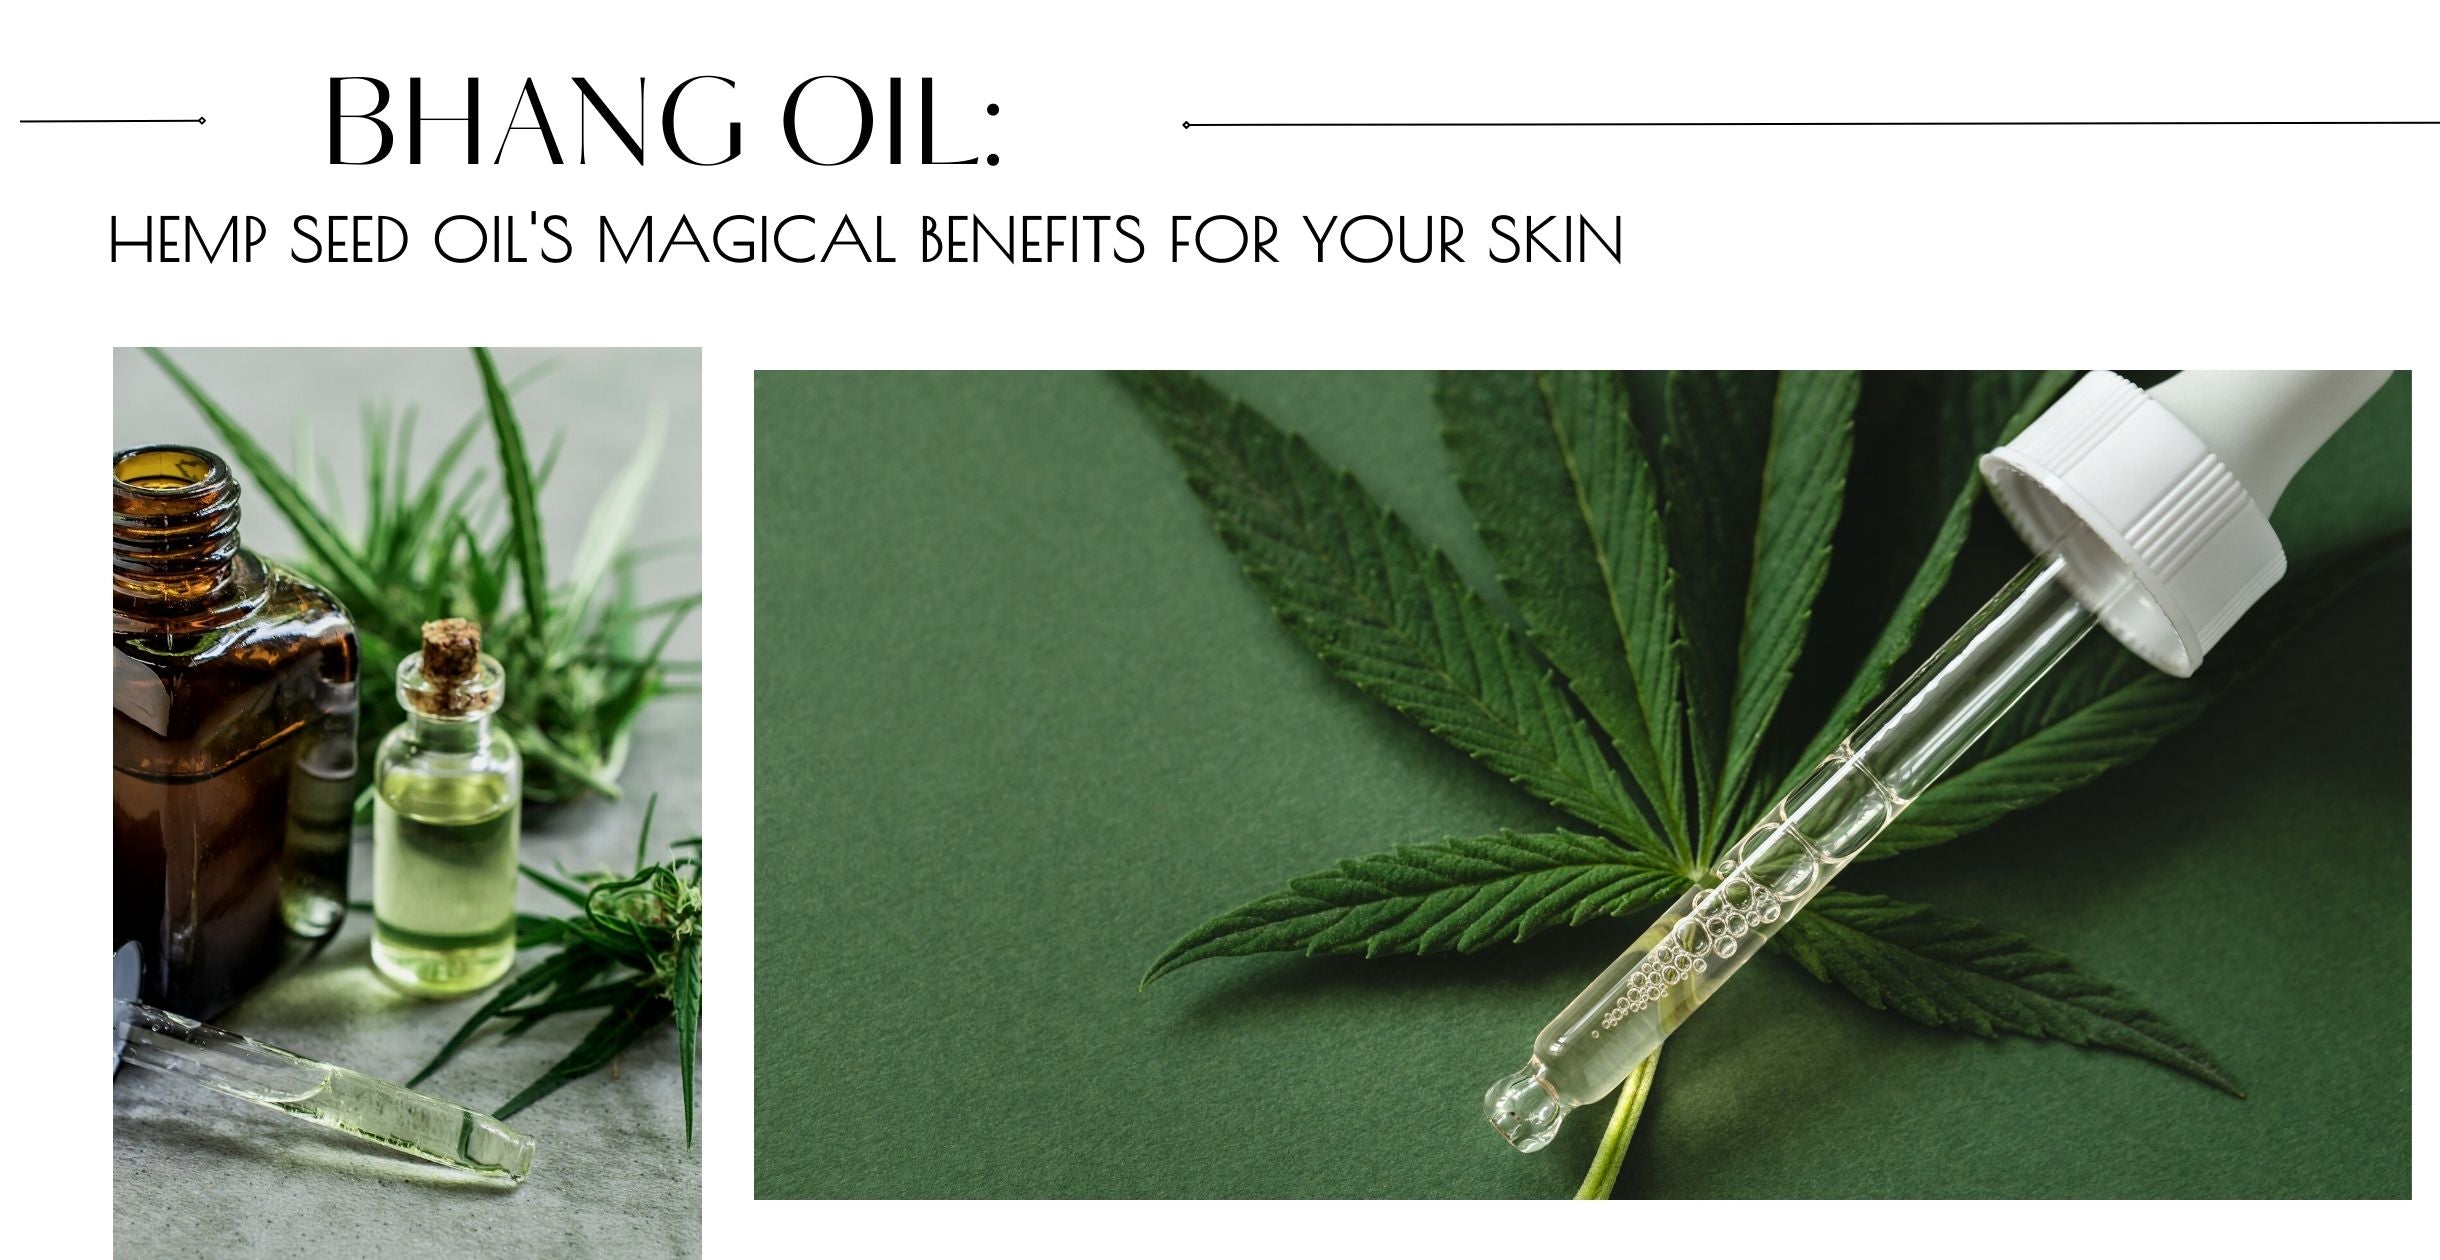 Bhang Oil: Hemp Seed Oil's Magical Benefits for Your Skin